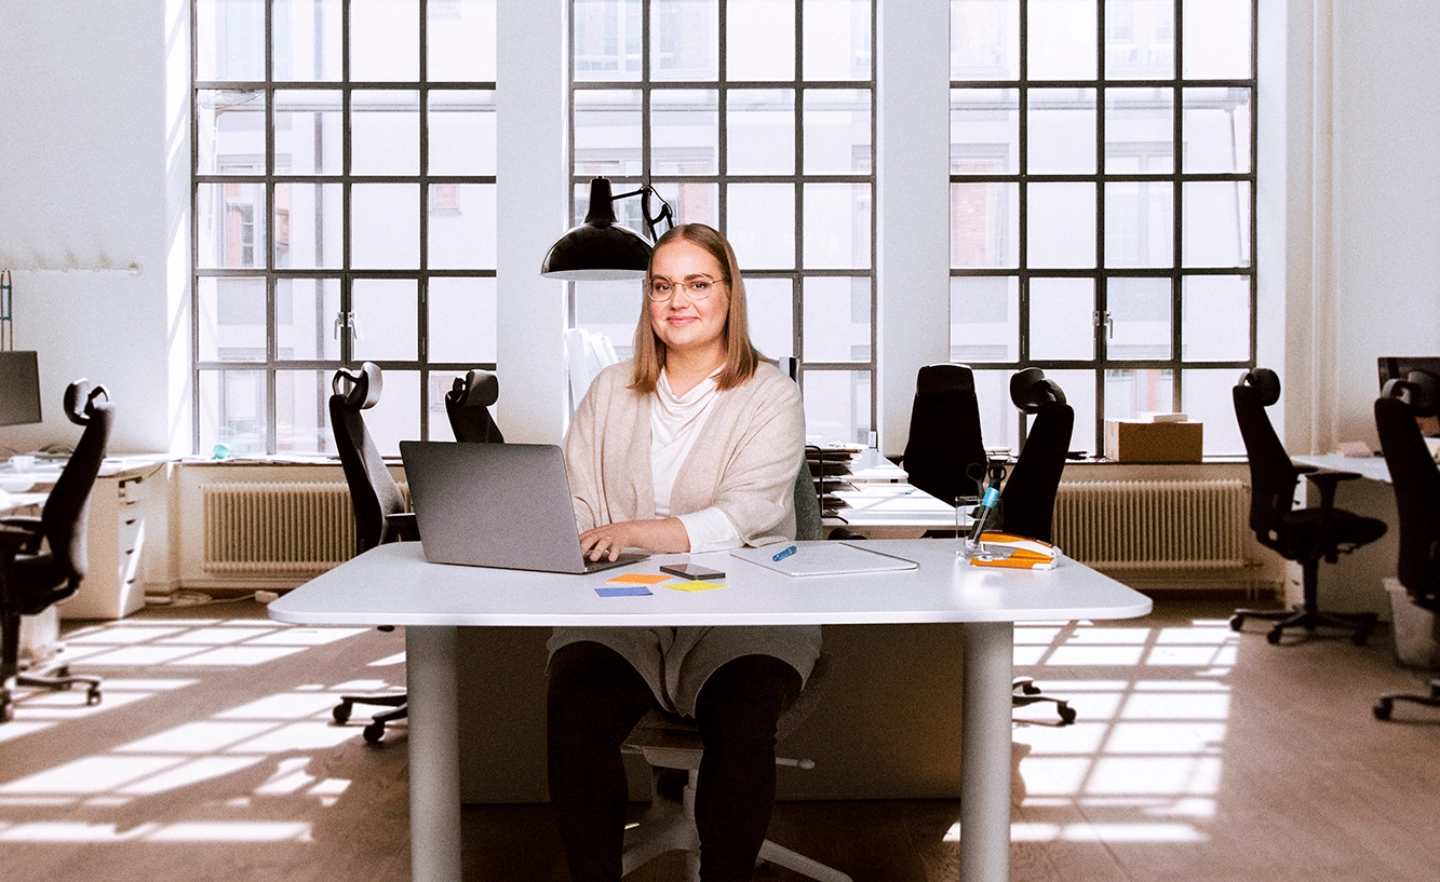 The International Recruitment Advice Service for Employers' customer service representative sits at a desk in the middle of a start-up company's office. - Work in Finland International Recruitment Advice Service for Employers